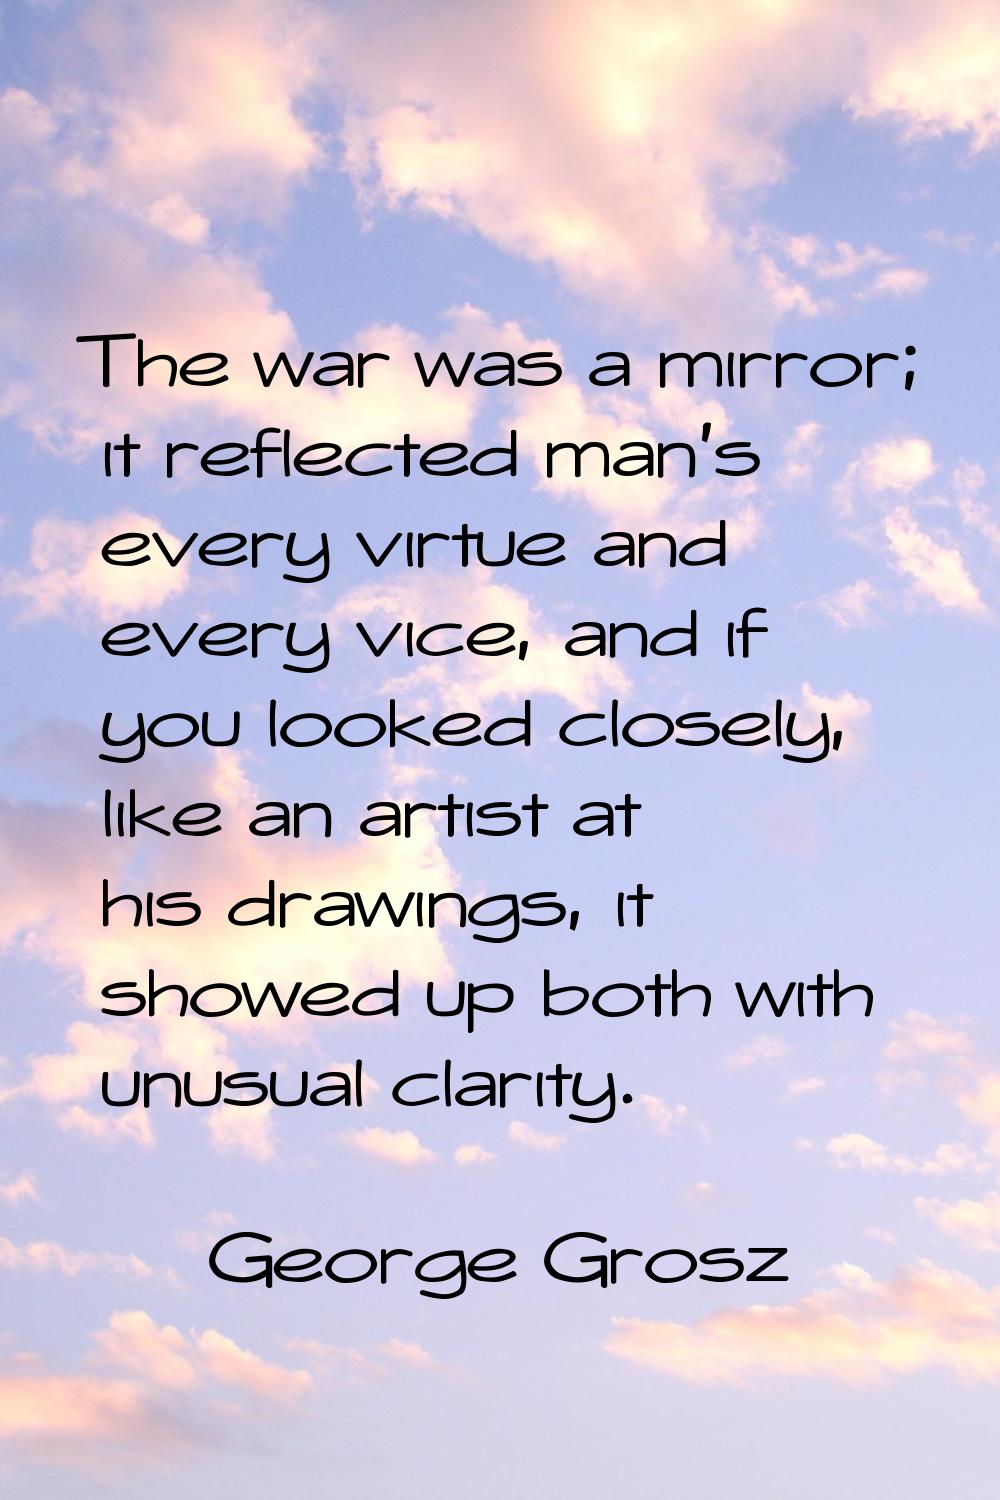 The war was a mirror; it reflected man's every virtue and every vice, and if you looked closely, li